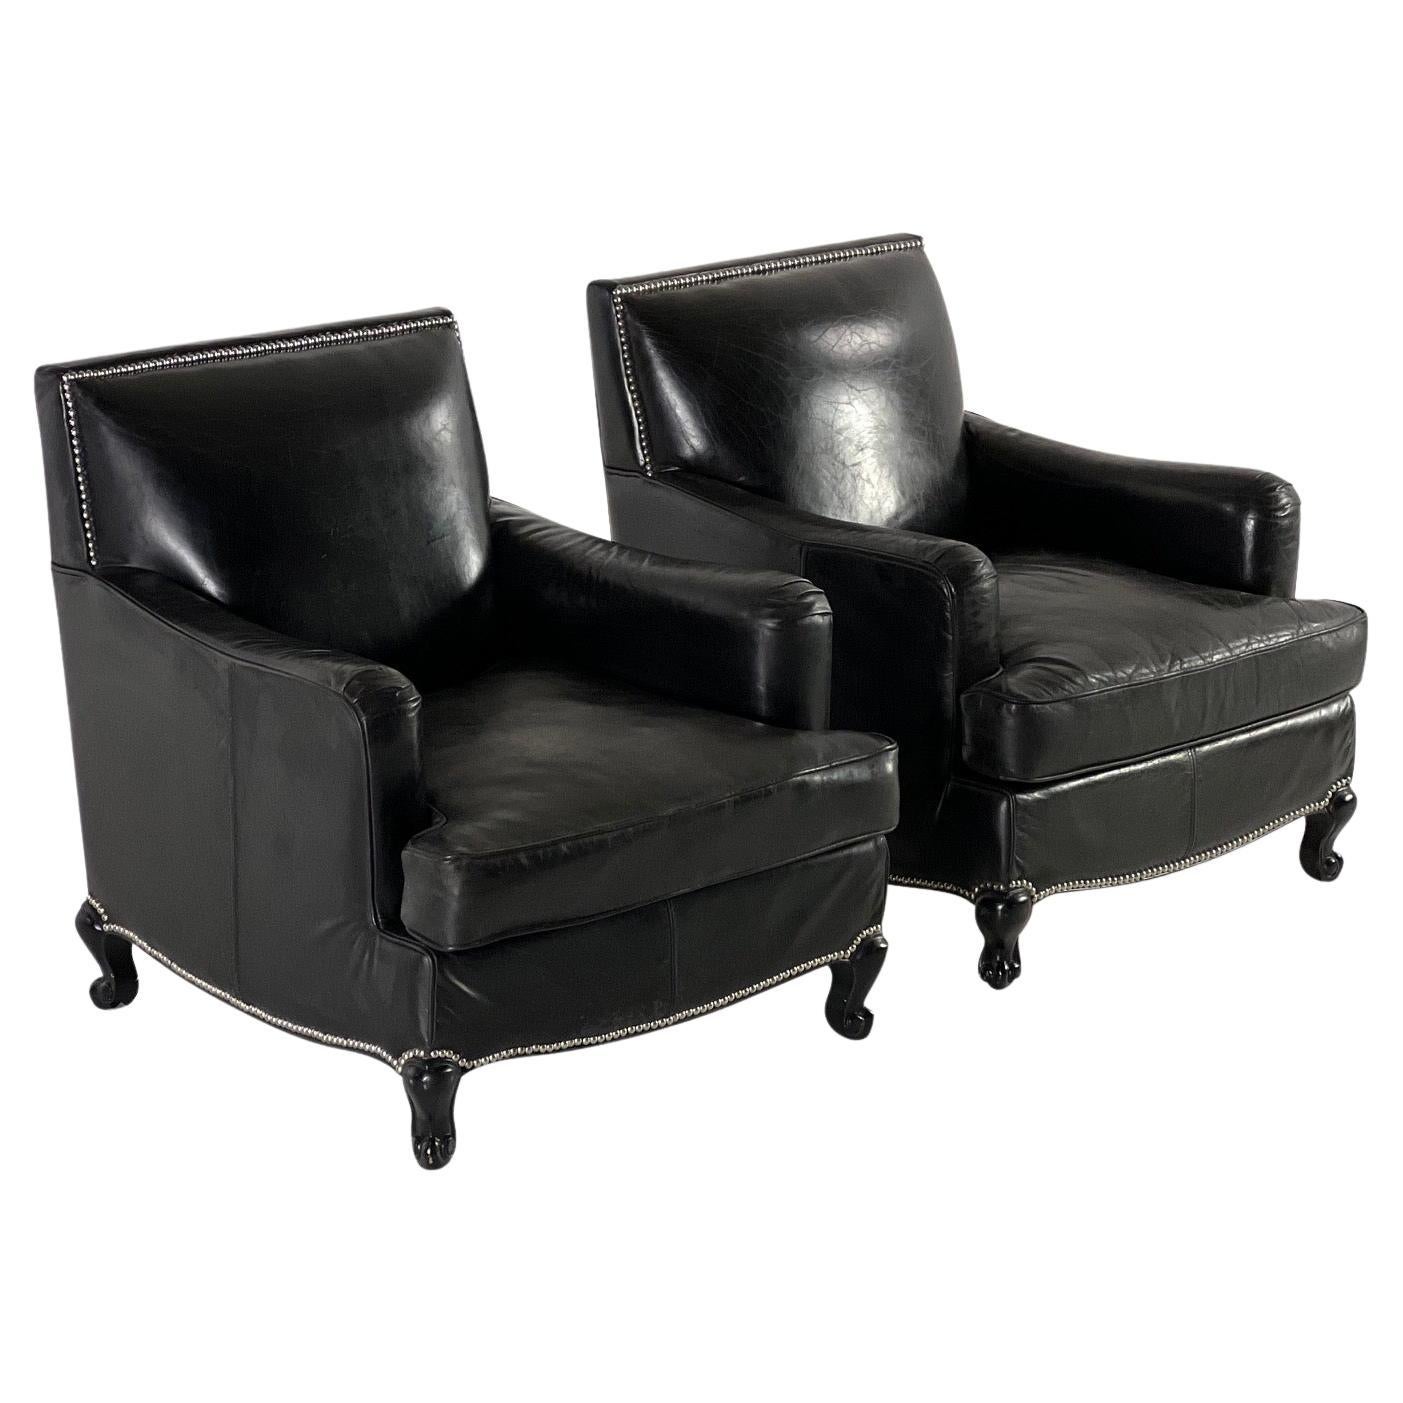 Stunning Pair of French Black Leather Club Armchairs